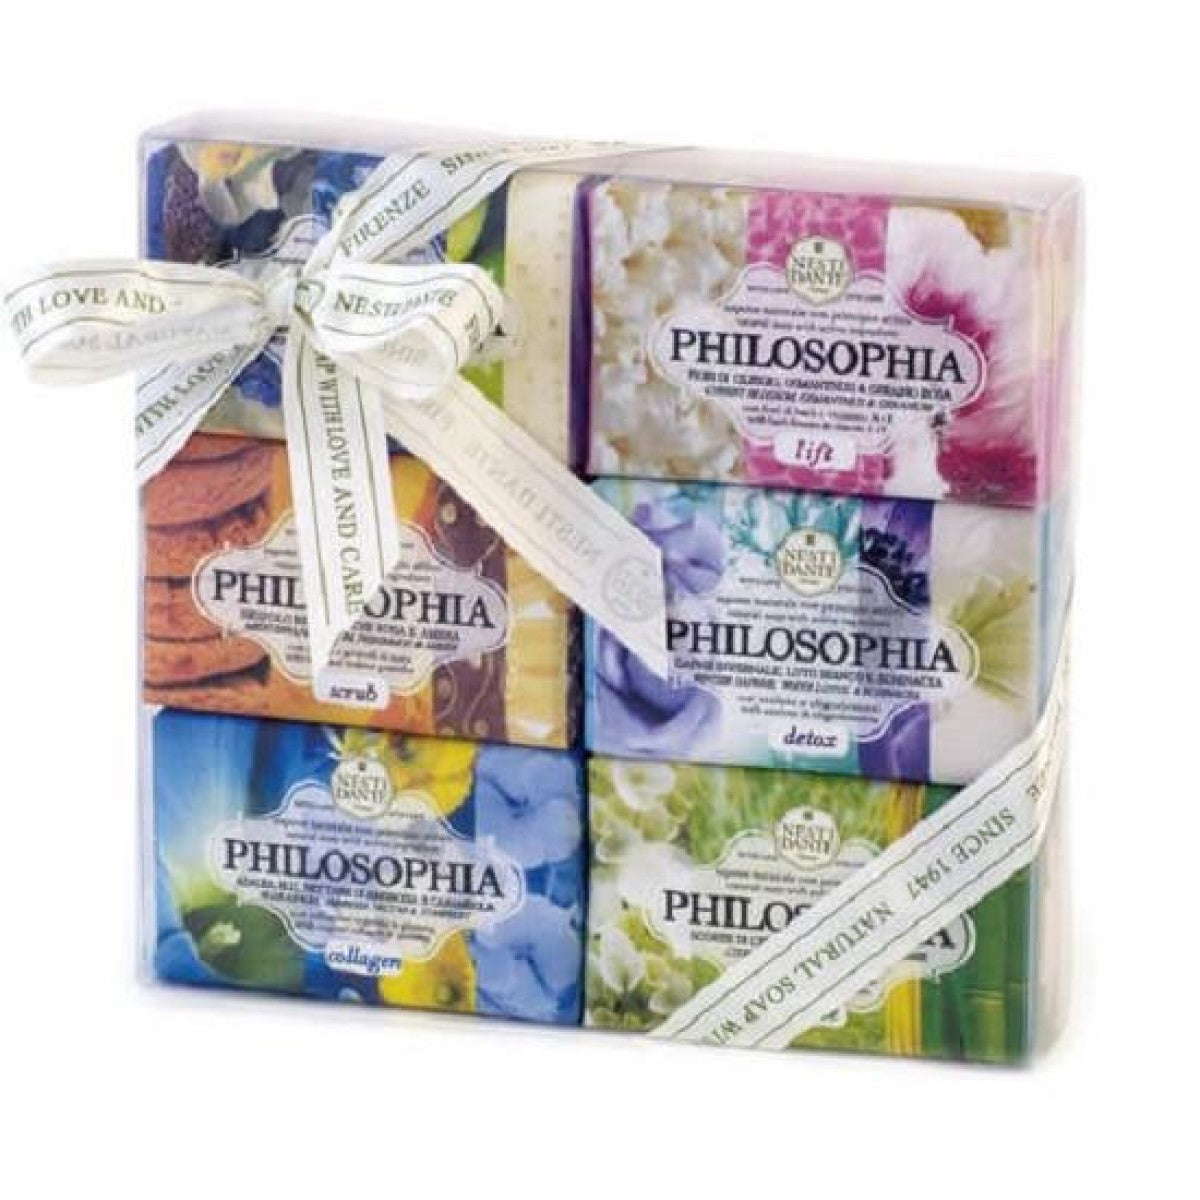 Primary Image of Philosphia Soap Kit Collection